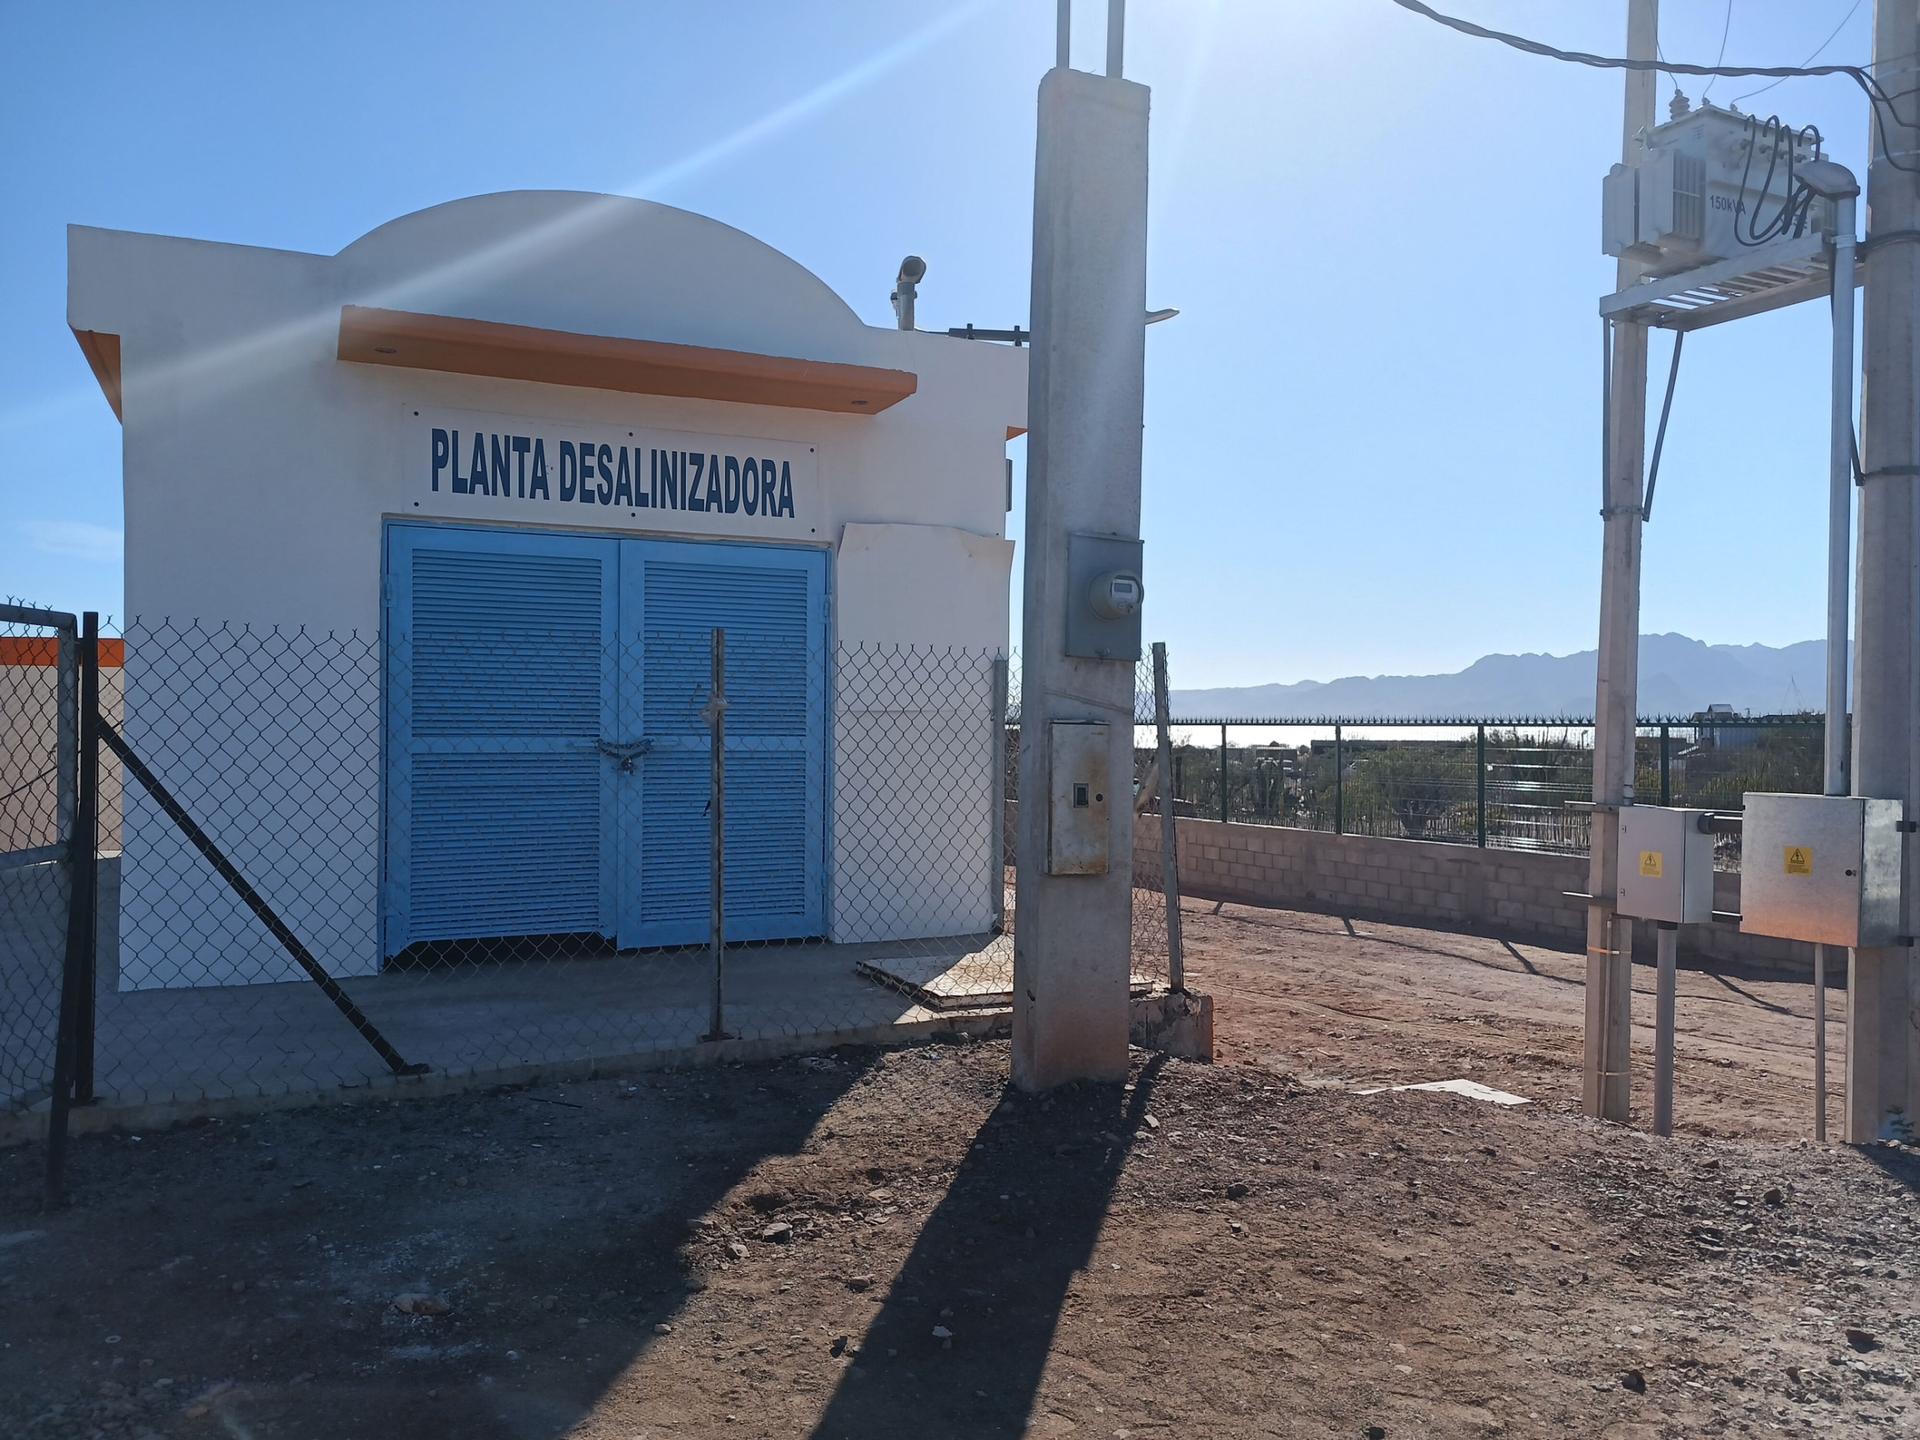 One of two desalination plants helps provide fresh water to the residents of Punta Chueca.